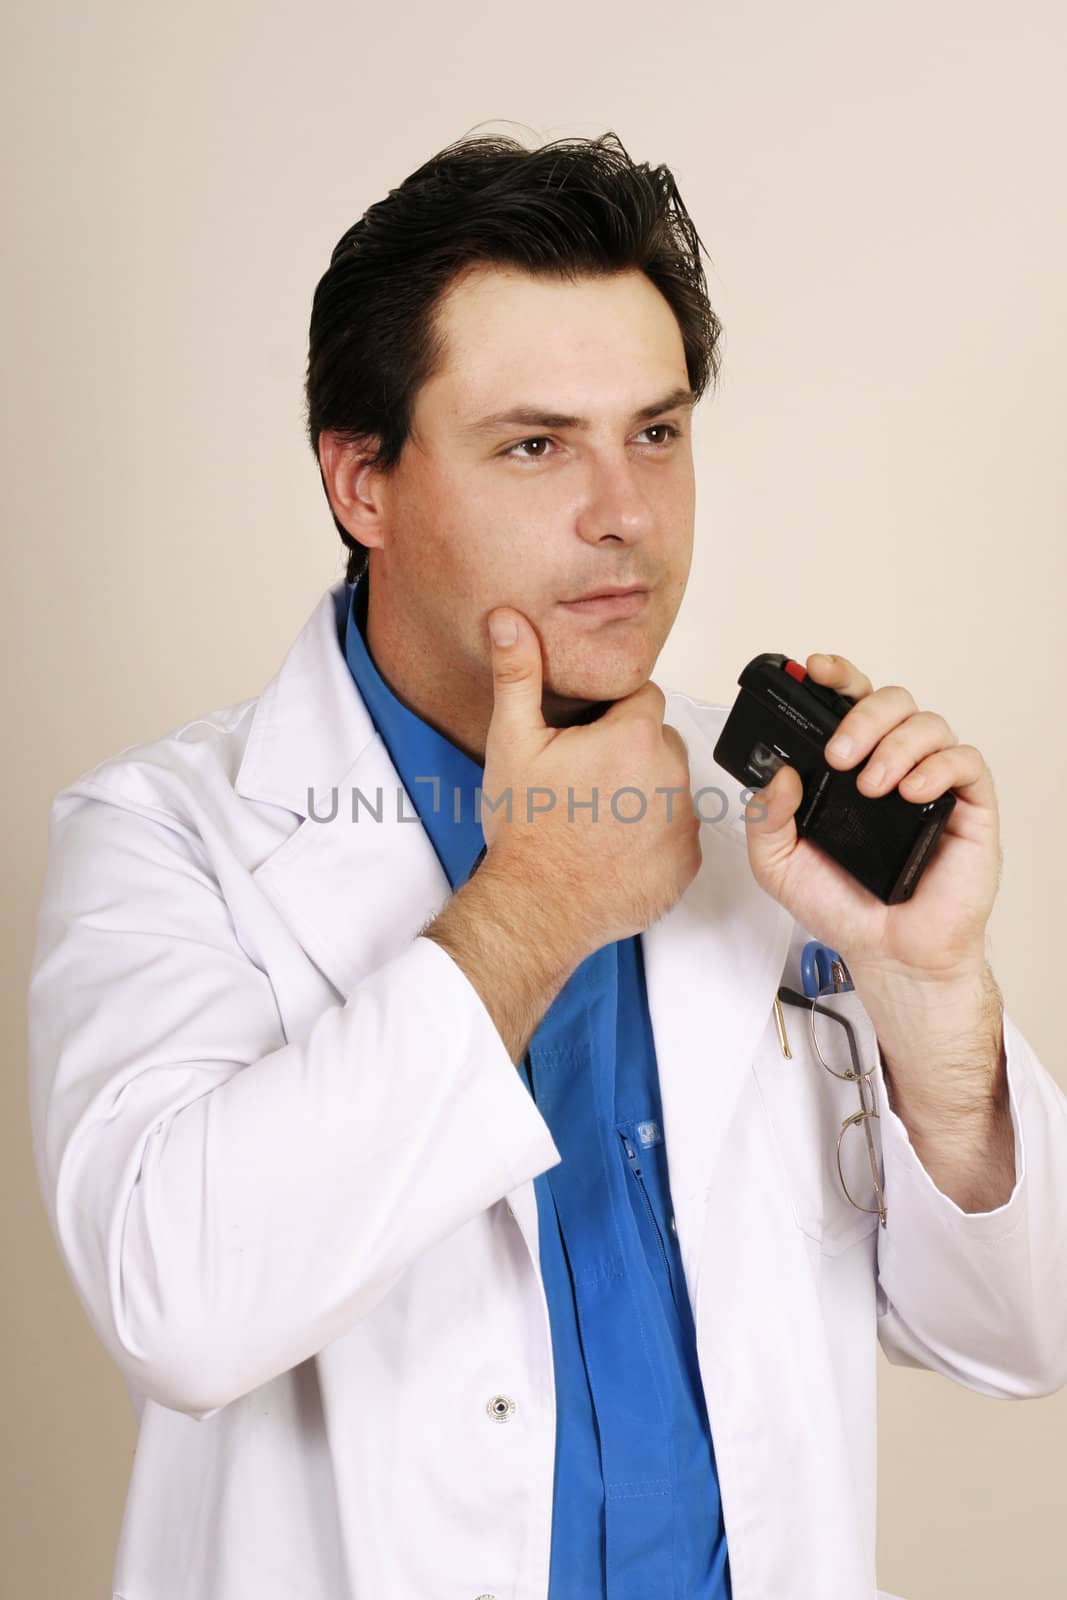 Doctor recording patient information by lovleah